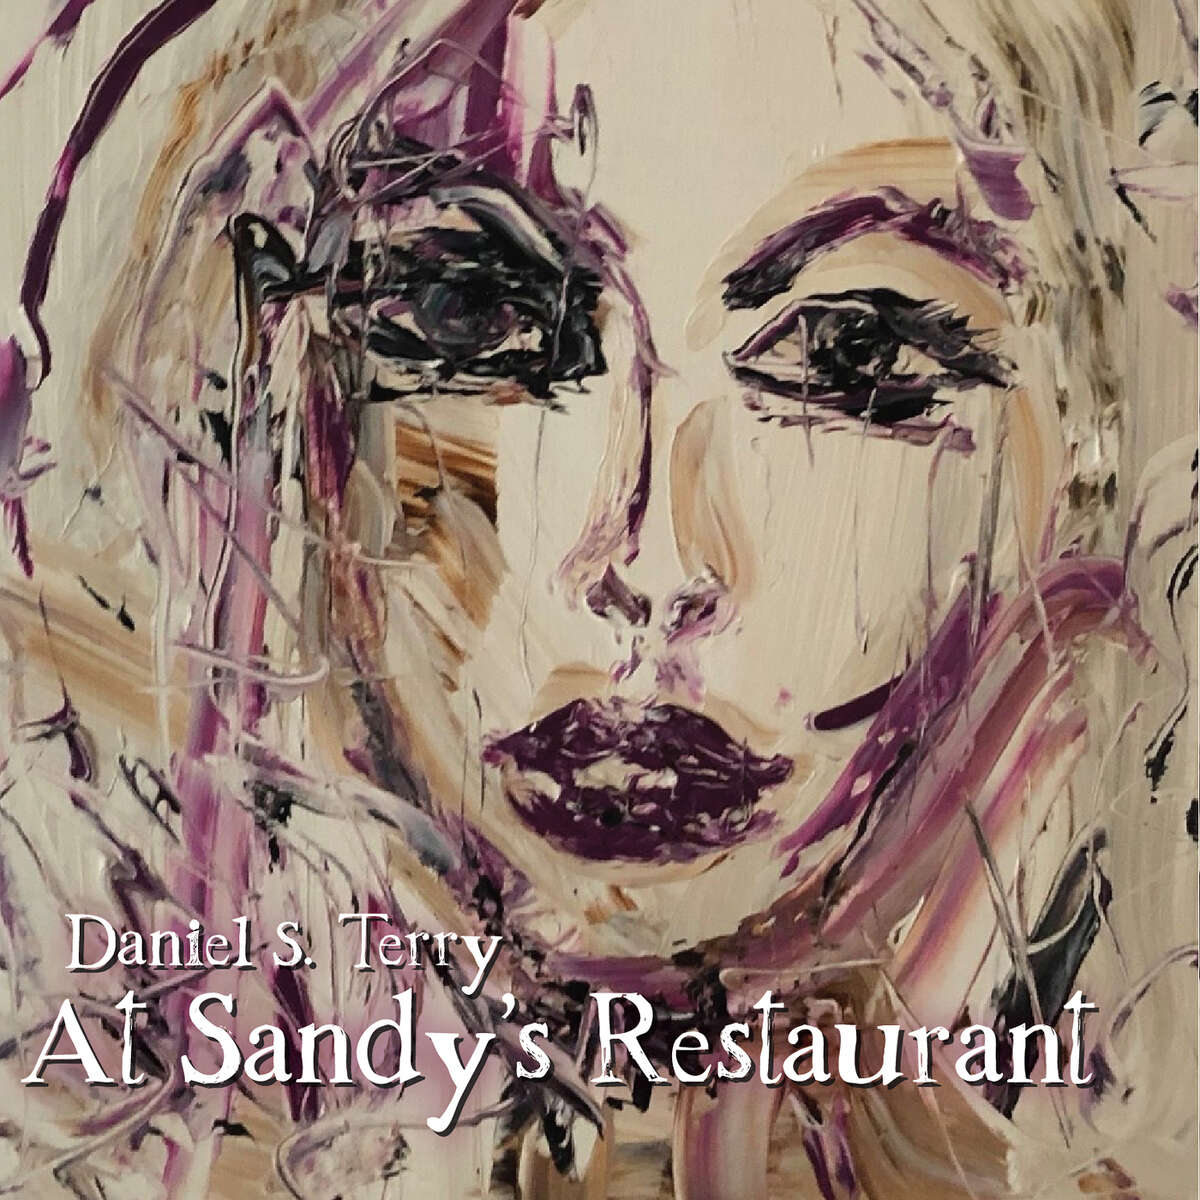 Daniel Terry just released his first album “At Sandy’s Restaurant,” featuring him on acoustic guitar with a 10-piece Nashville backup band. Hear Terry’s new songs and learn more about his songwriting pastime at 7 p.m. Friday, Feb. 11, as part of the Big Rapids Festival of the Arts.